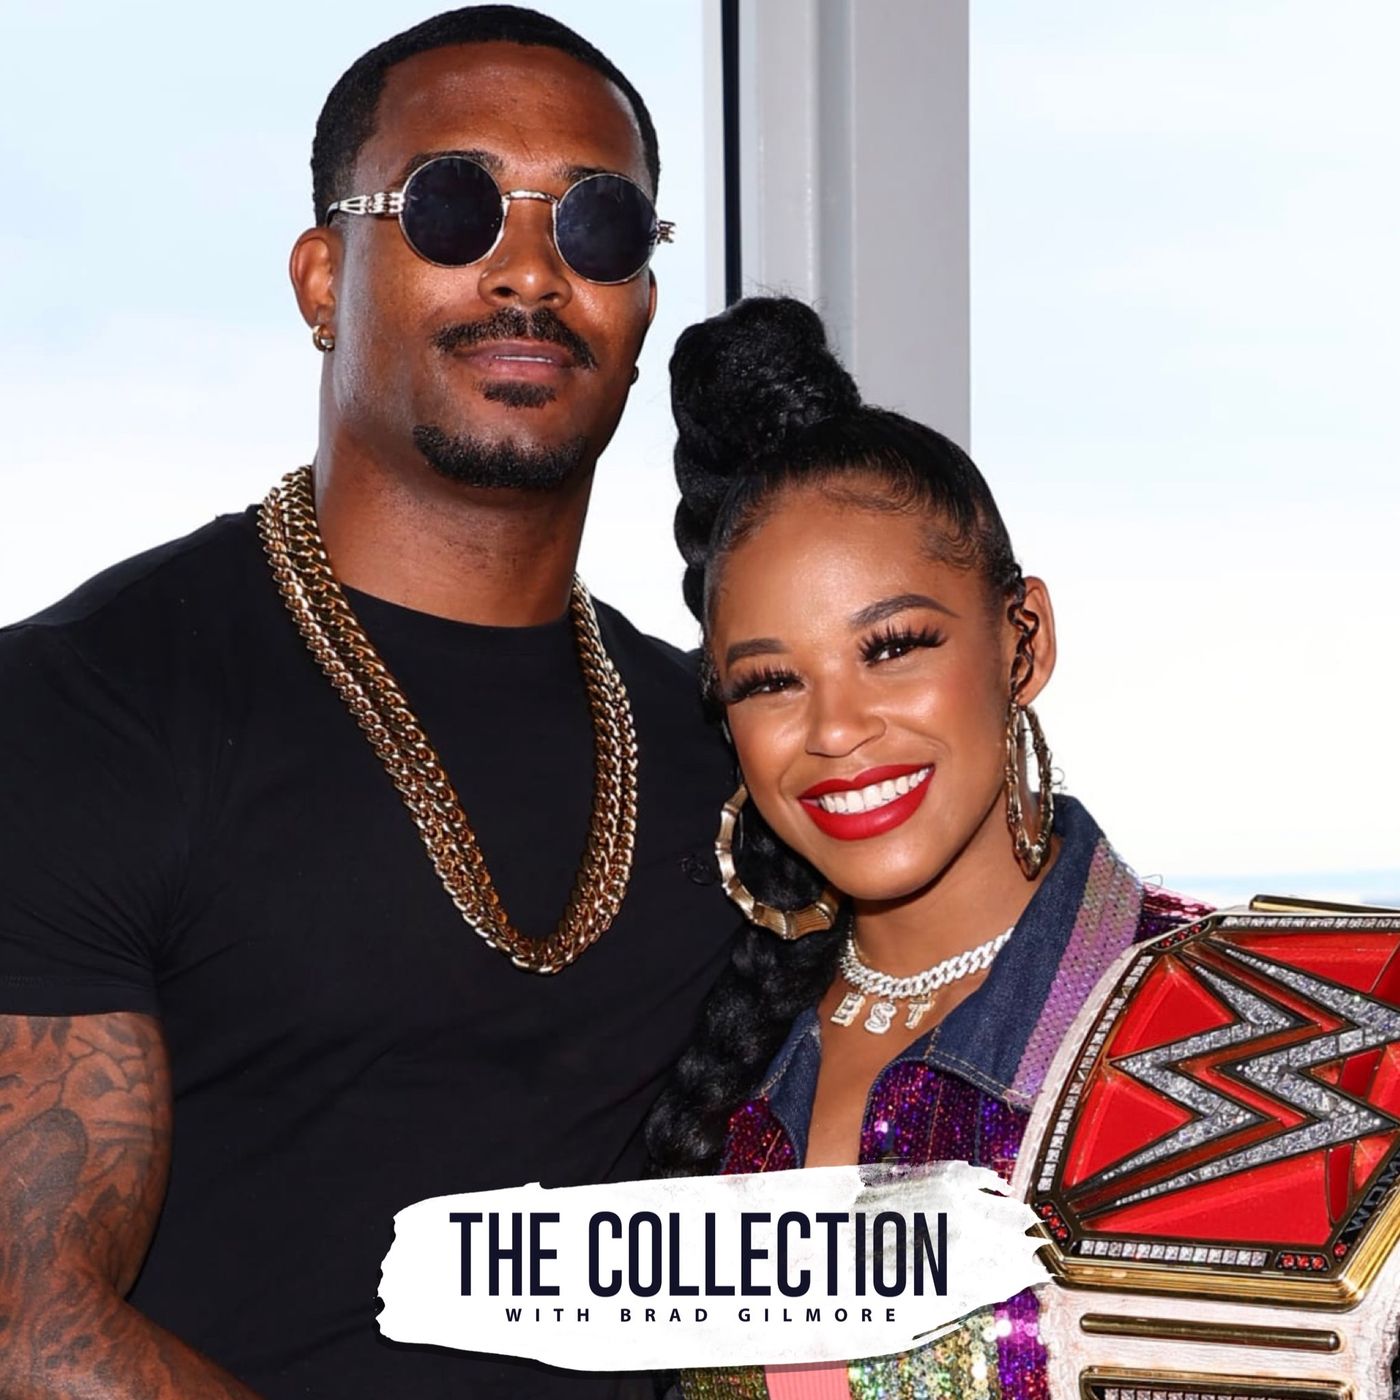 Bianca Belair and Montez Ford, 